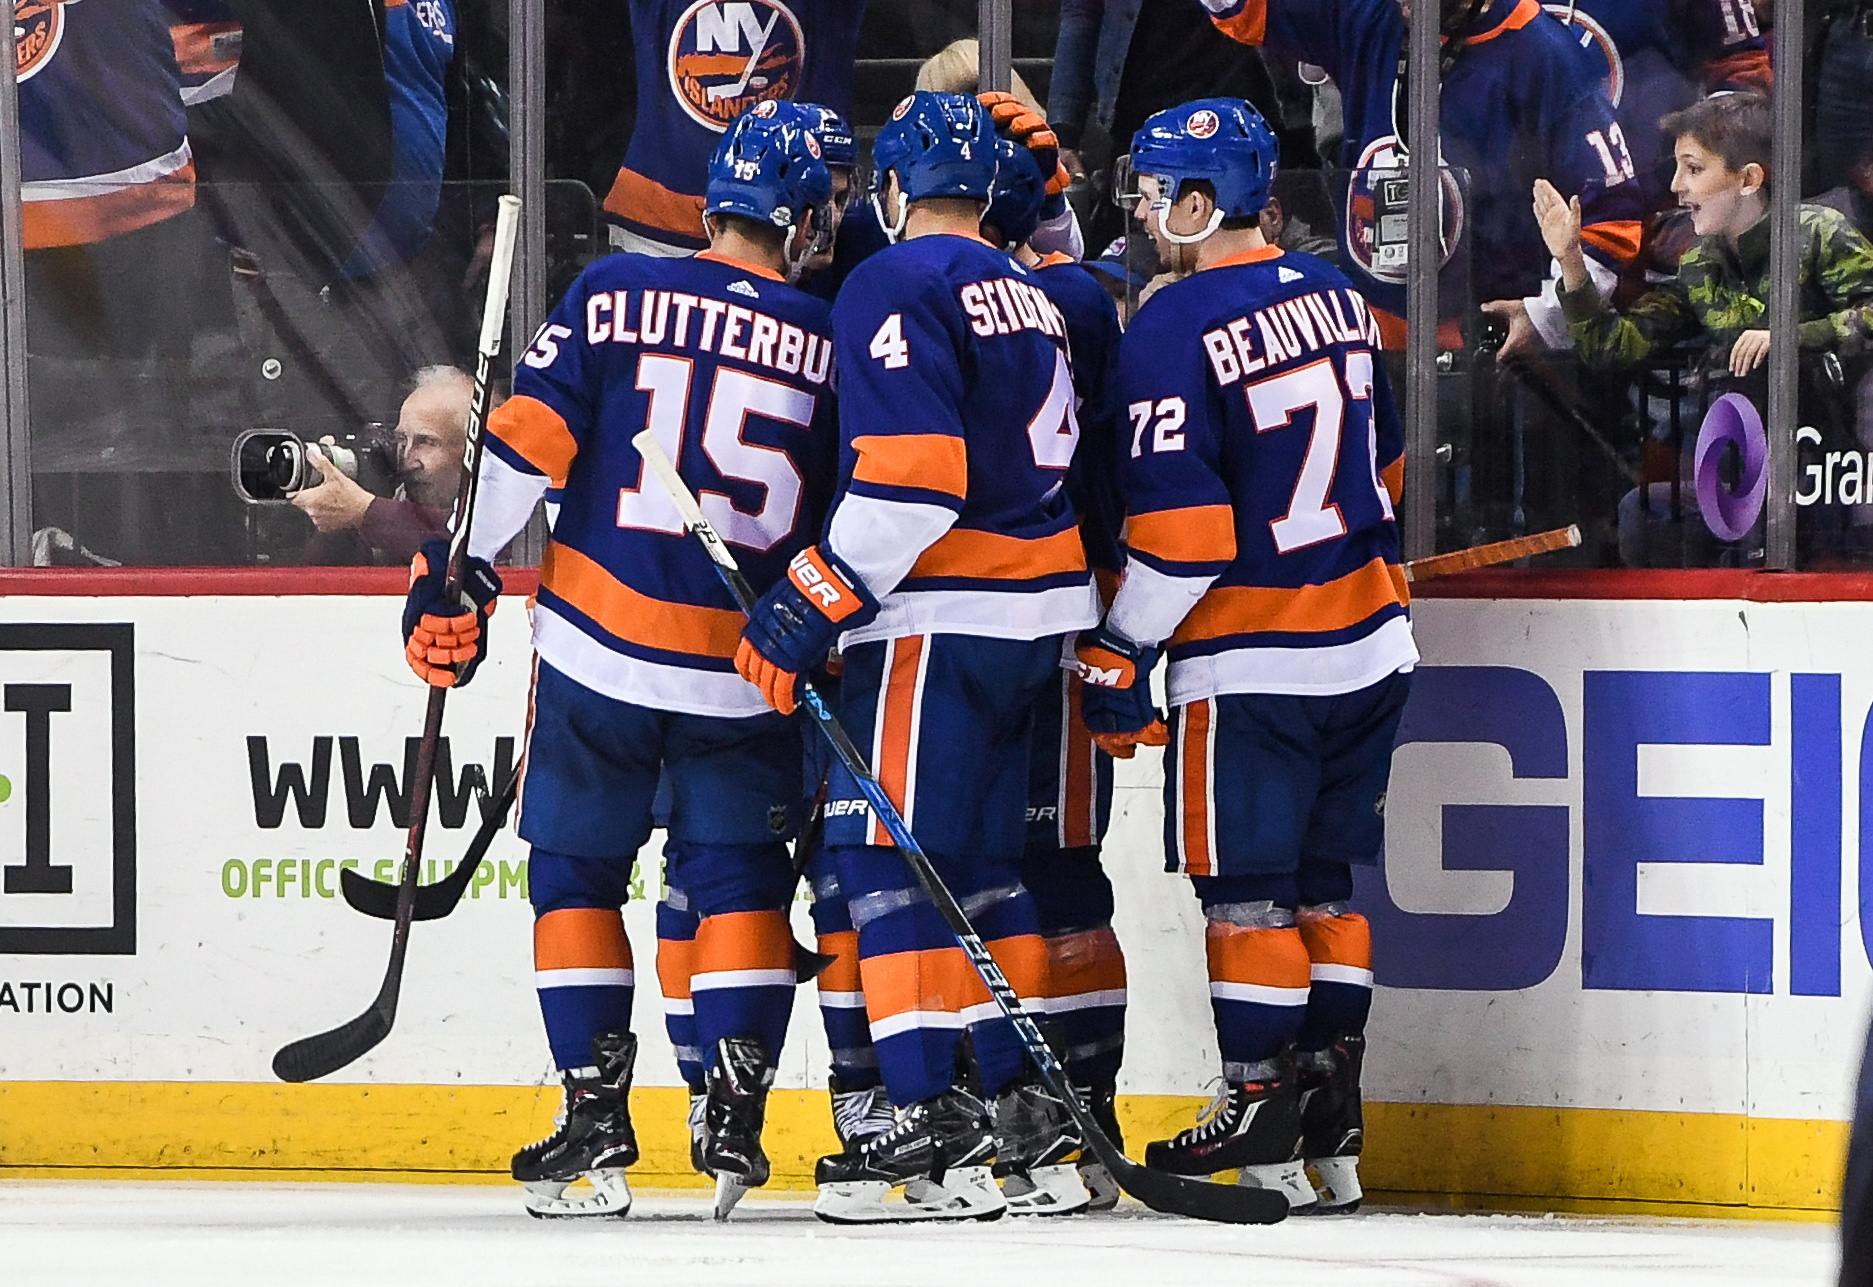 Feb 15, 2018; Brooklyn, NY, USA; New York Islanders celebrate the goal of New York Islanders defenseman Thomas Hickey (14) against the New York Rangers to make it 3-0 during the third period at Barclays Center. Mandatory Credit: Dennis Schneidler-USA TODAY Sports